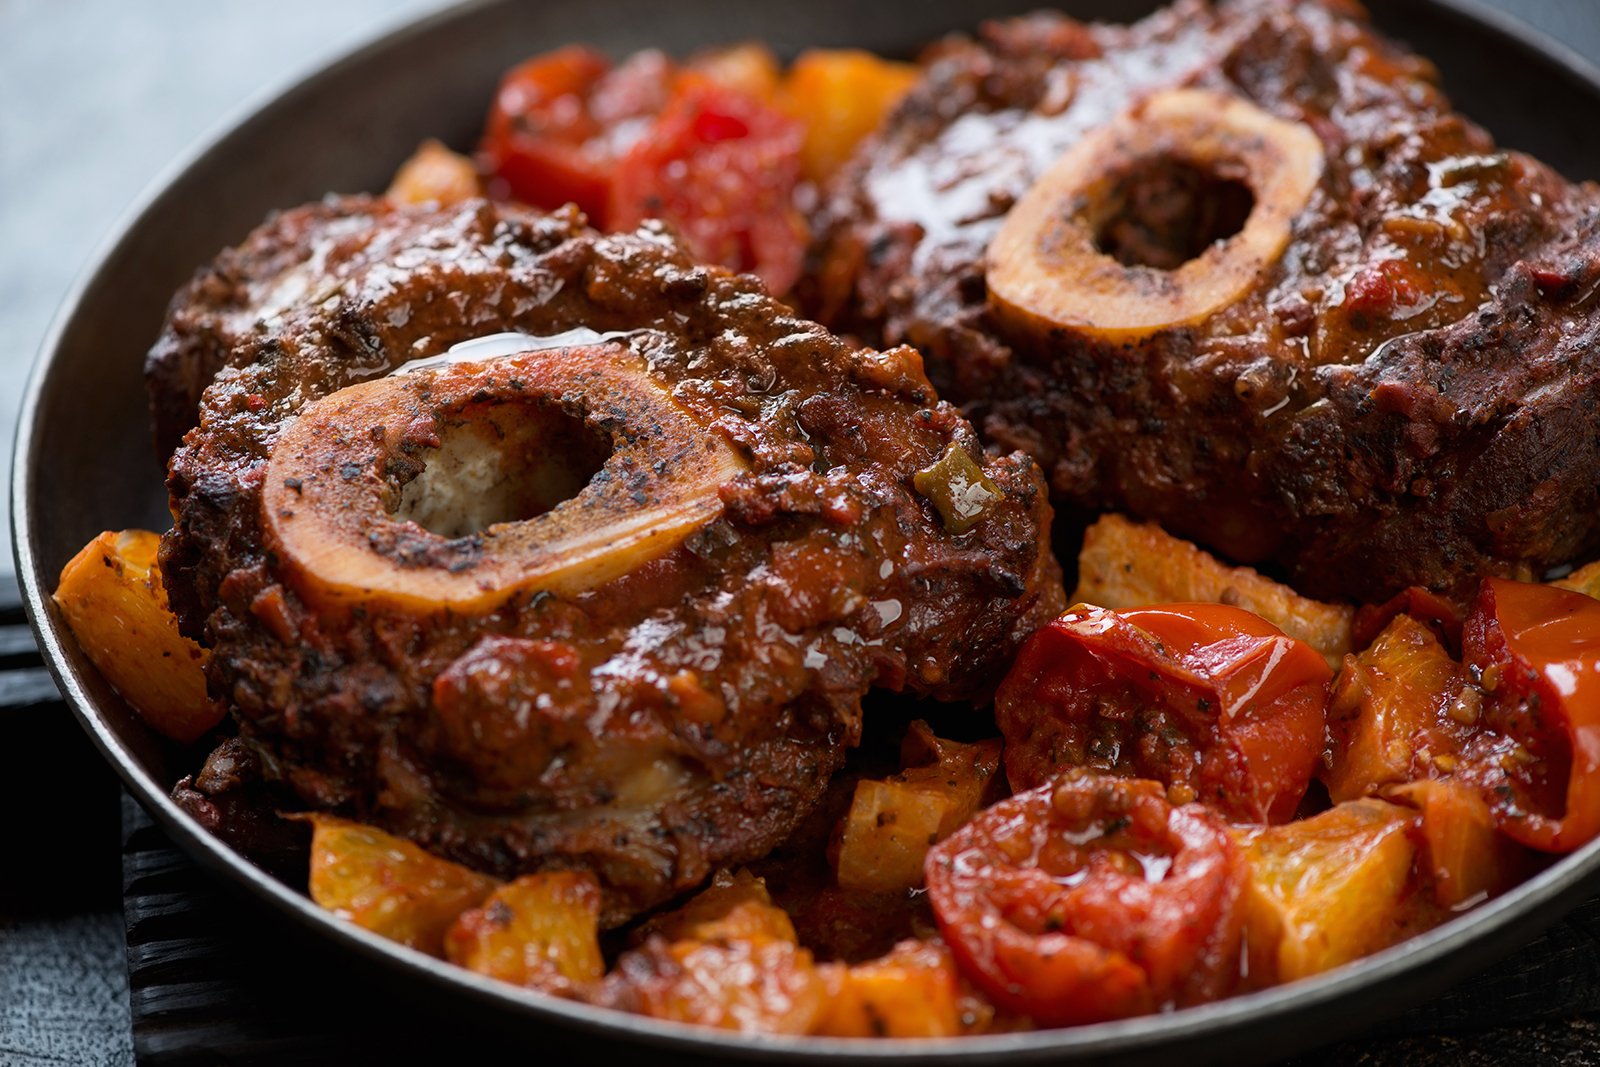 Closeup of osso buco made of cross cut veal shank with oranges and tomatoes